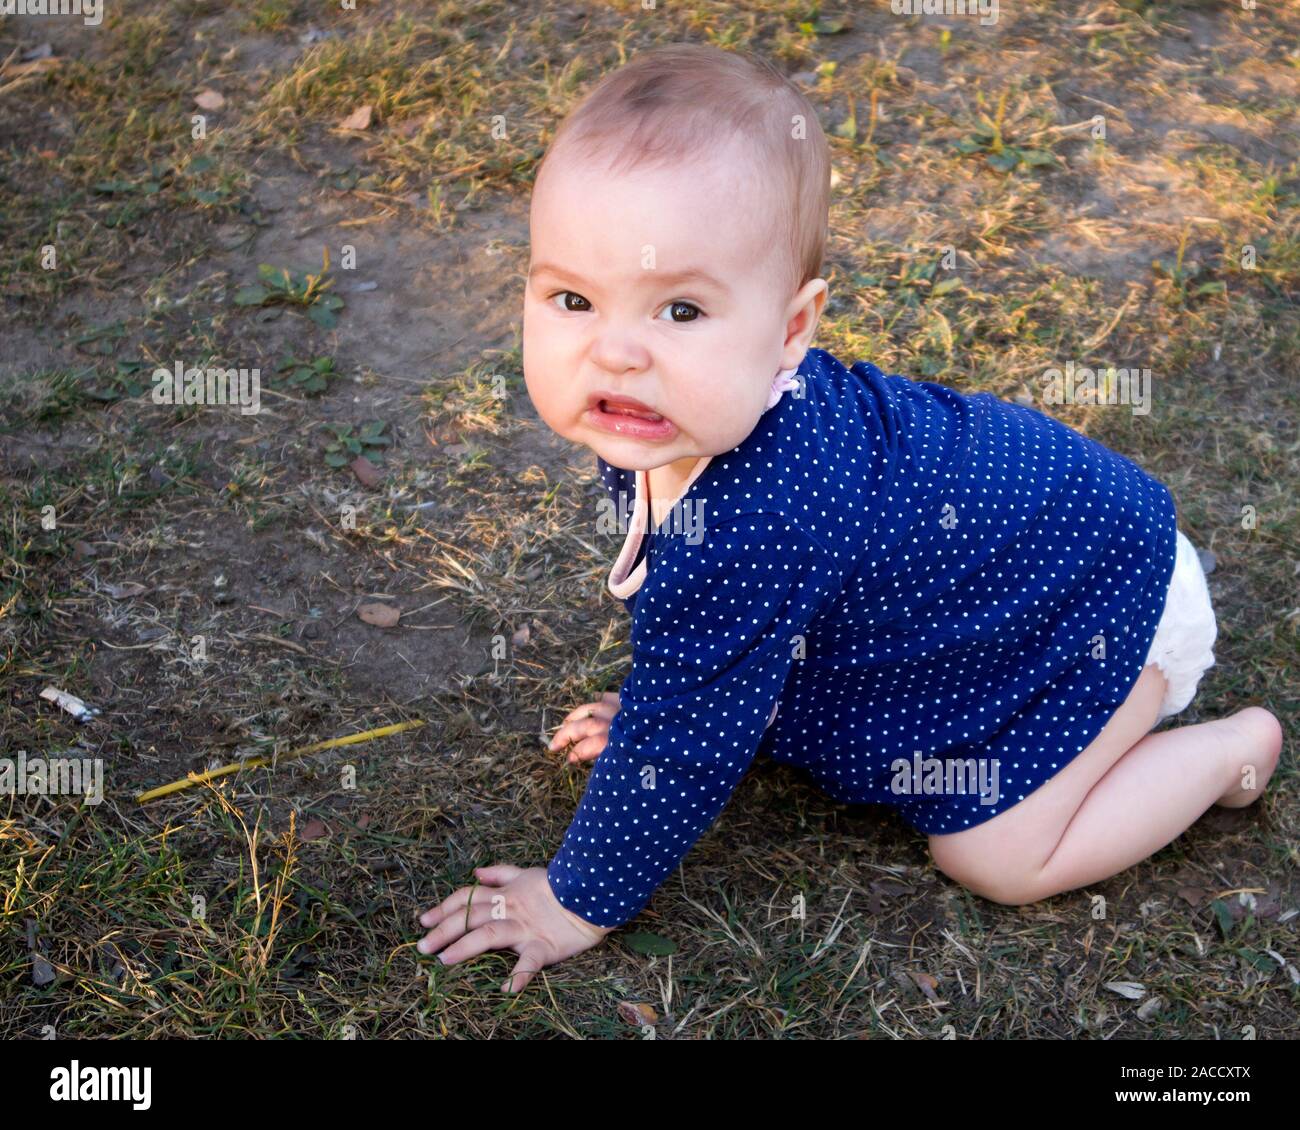 Adorable infant girl trying to make her first steps and grimacing at the camera Stock Photo